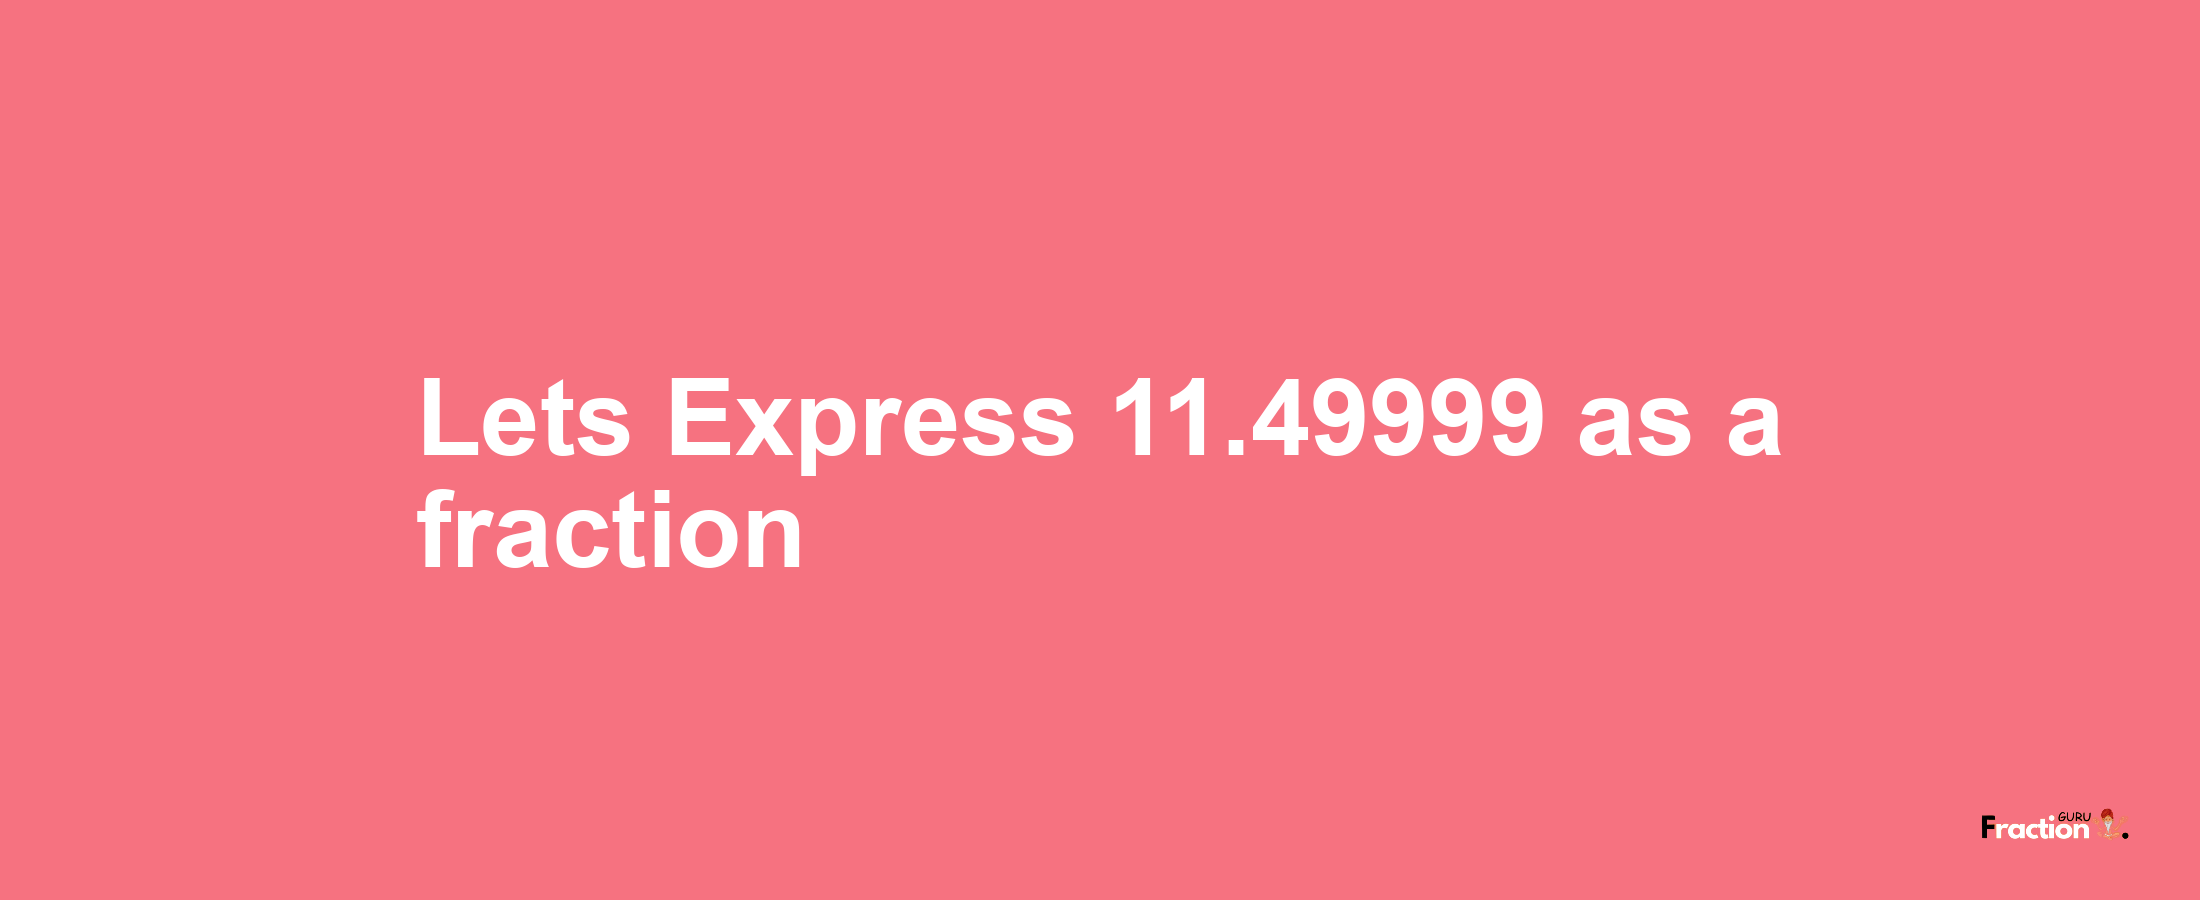 Lets Express 11.49999 as afraction